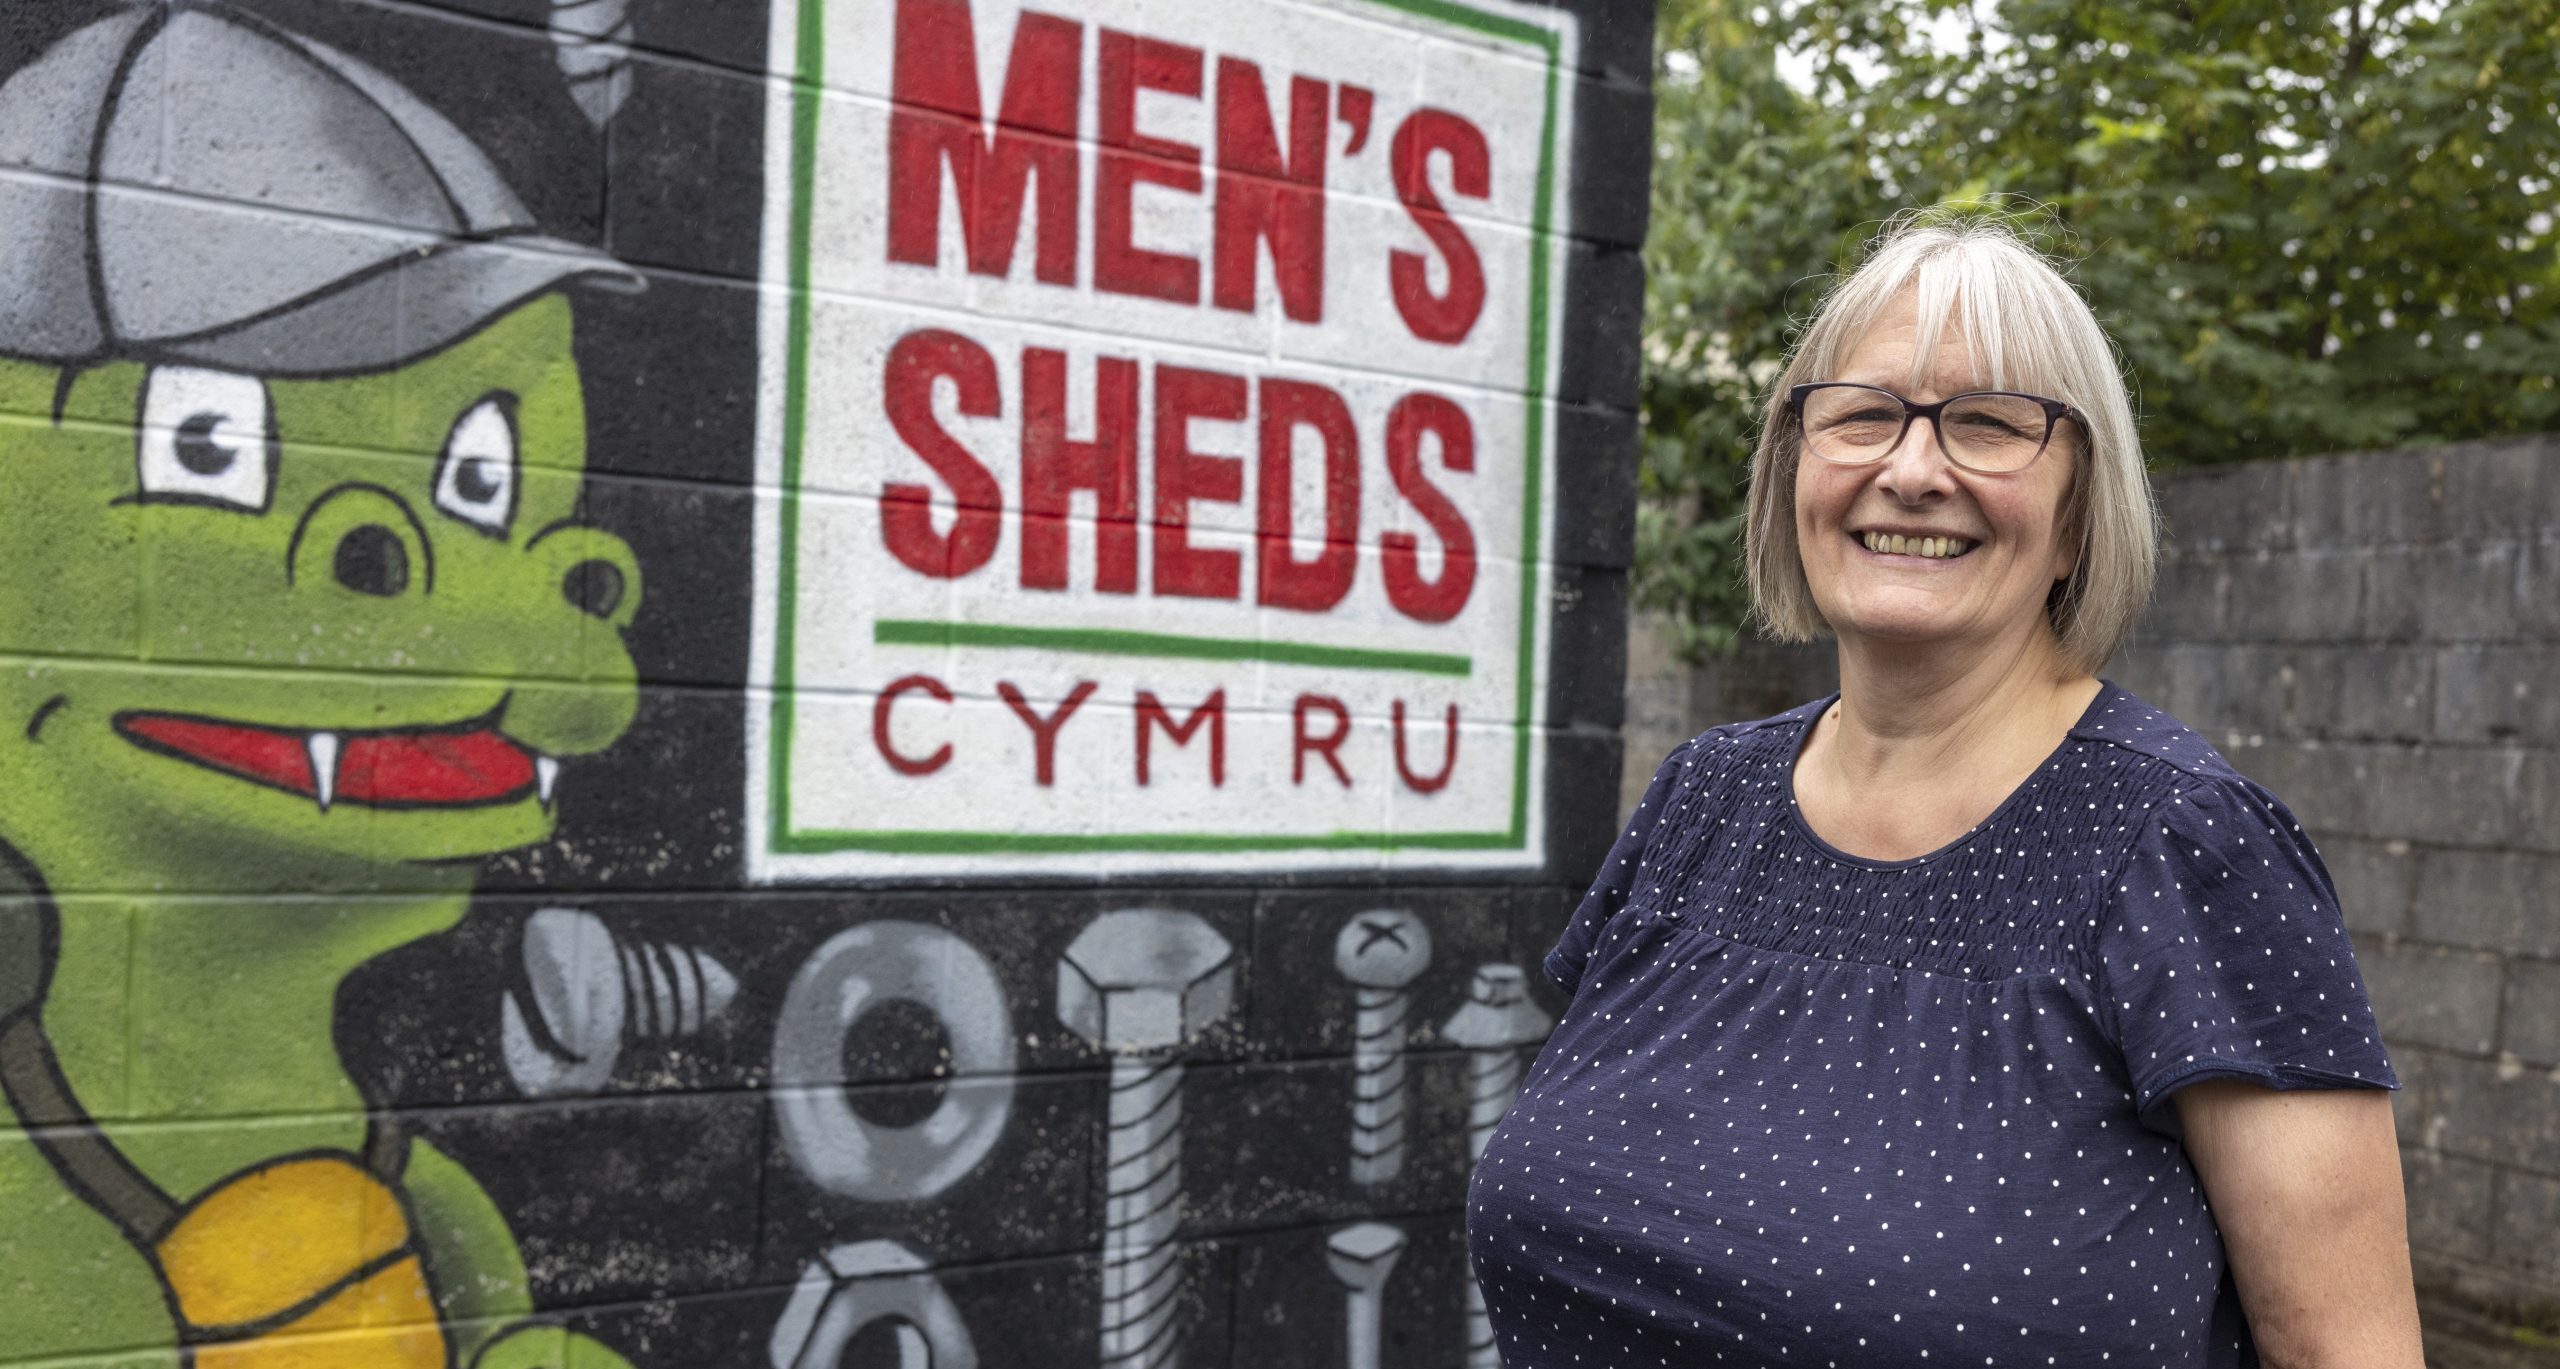 A lady smiling in front of a mural which reads 'Men's Sheds Cymru' next to a dragon wearing a cap.